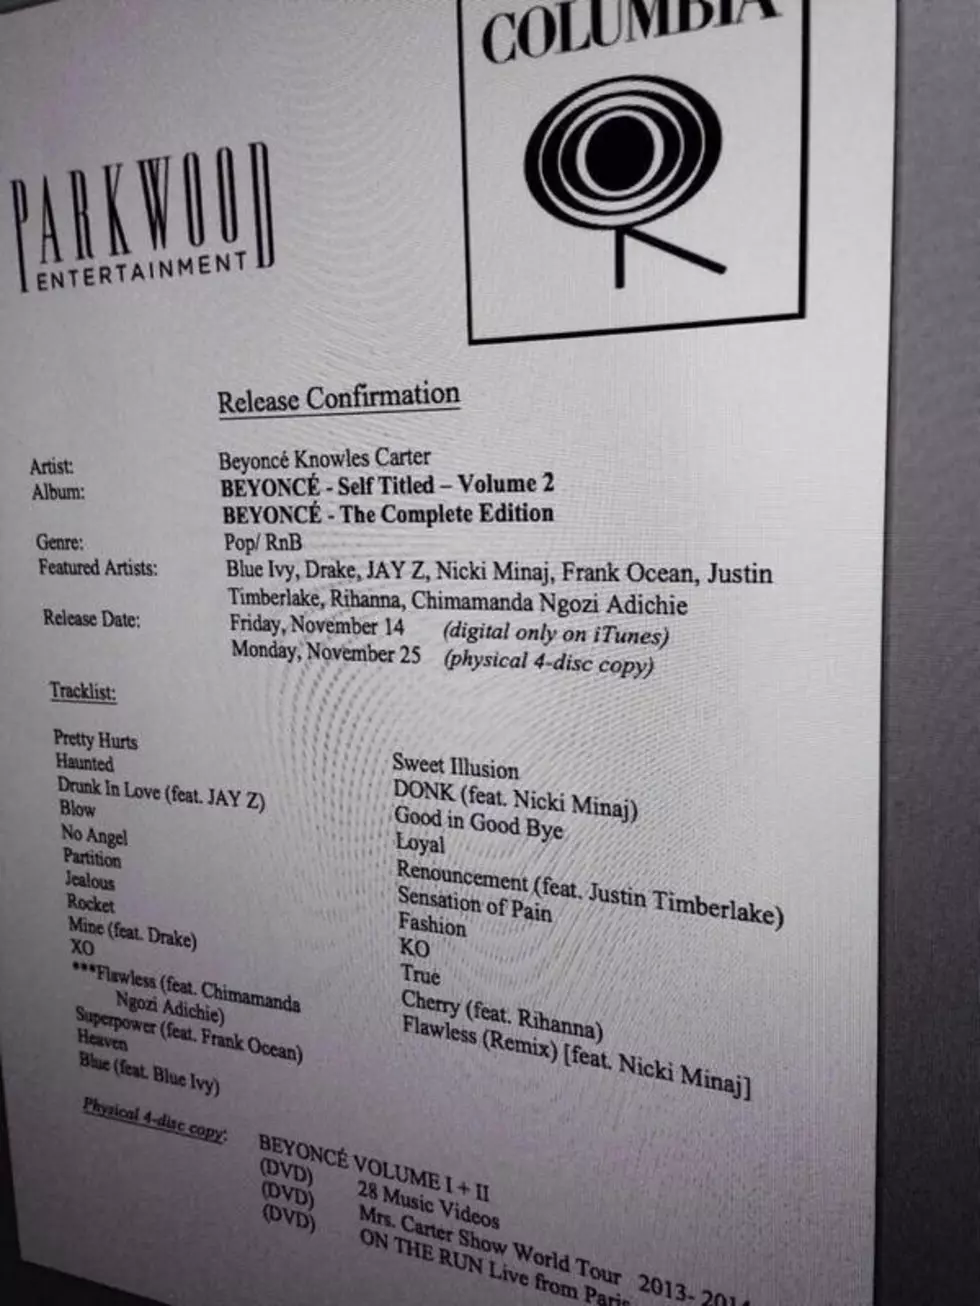 Is This Alleged Track List For Beyonce’s Upcoming Album Real Or Nah?